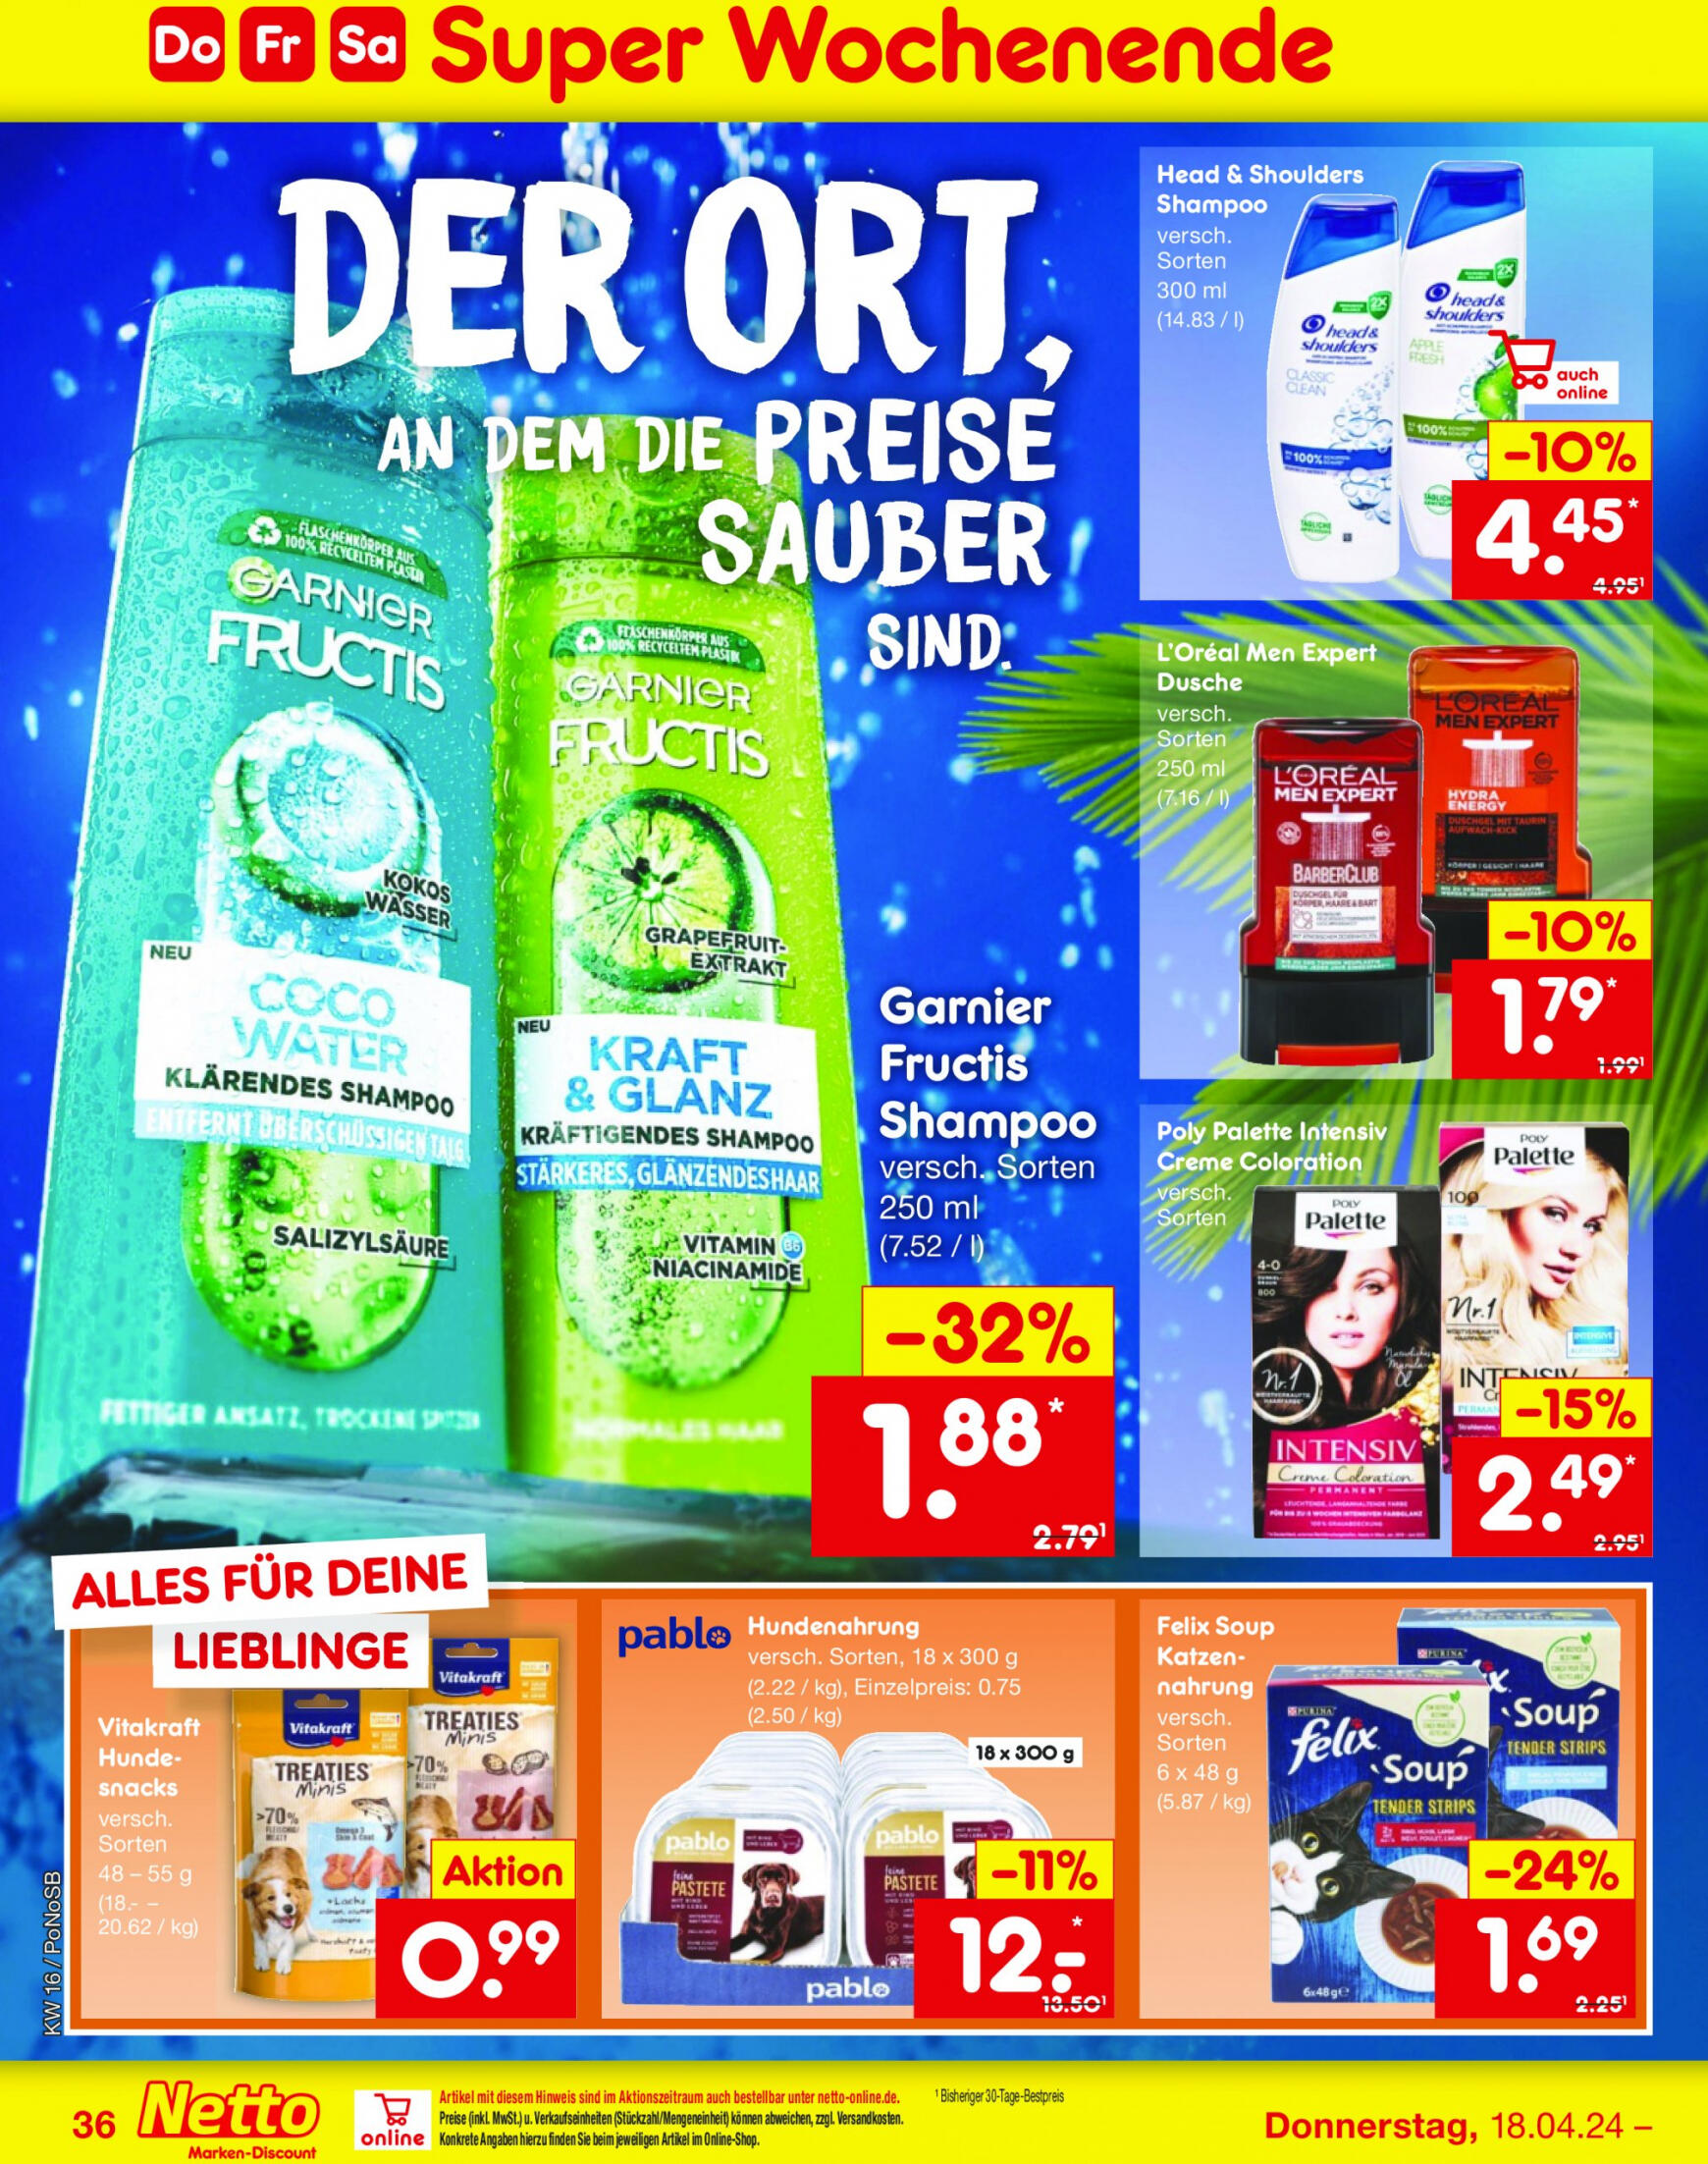 netto - Flyer Netto aktuell 15.04. - 20.04. - page: 42